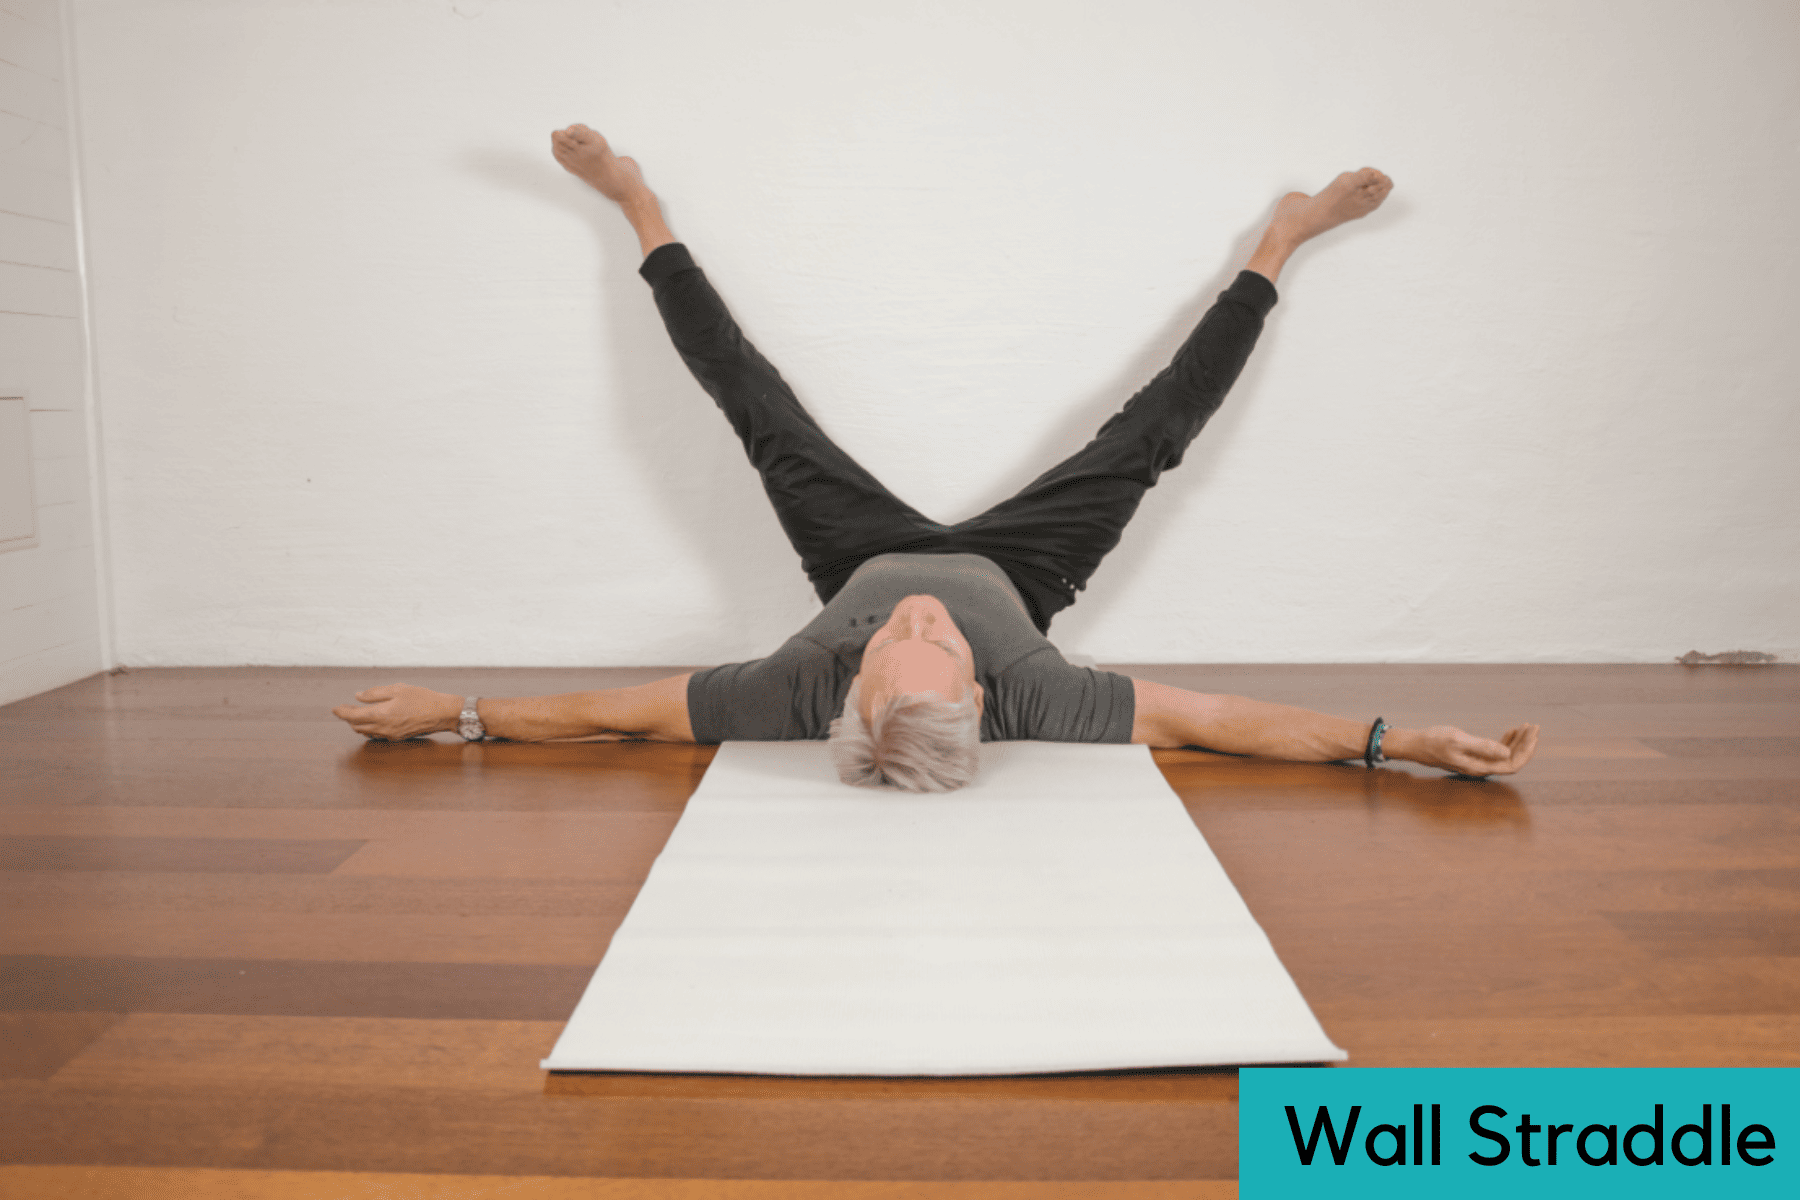 Wall Straddle